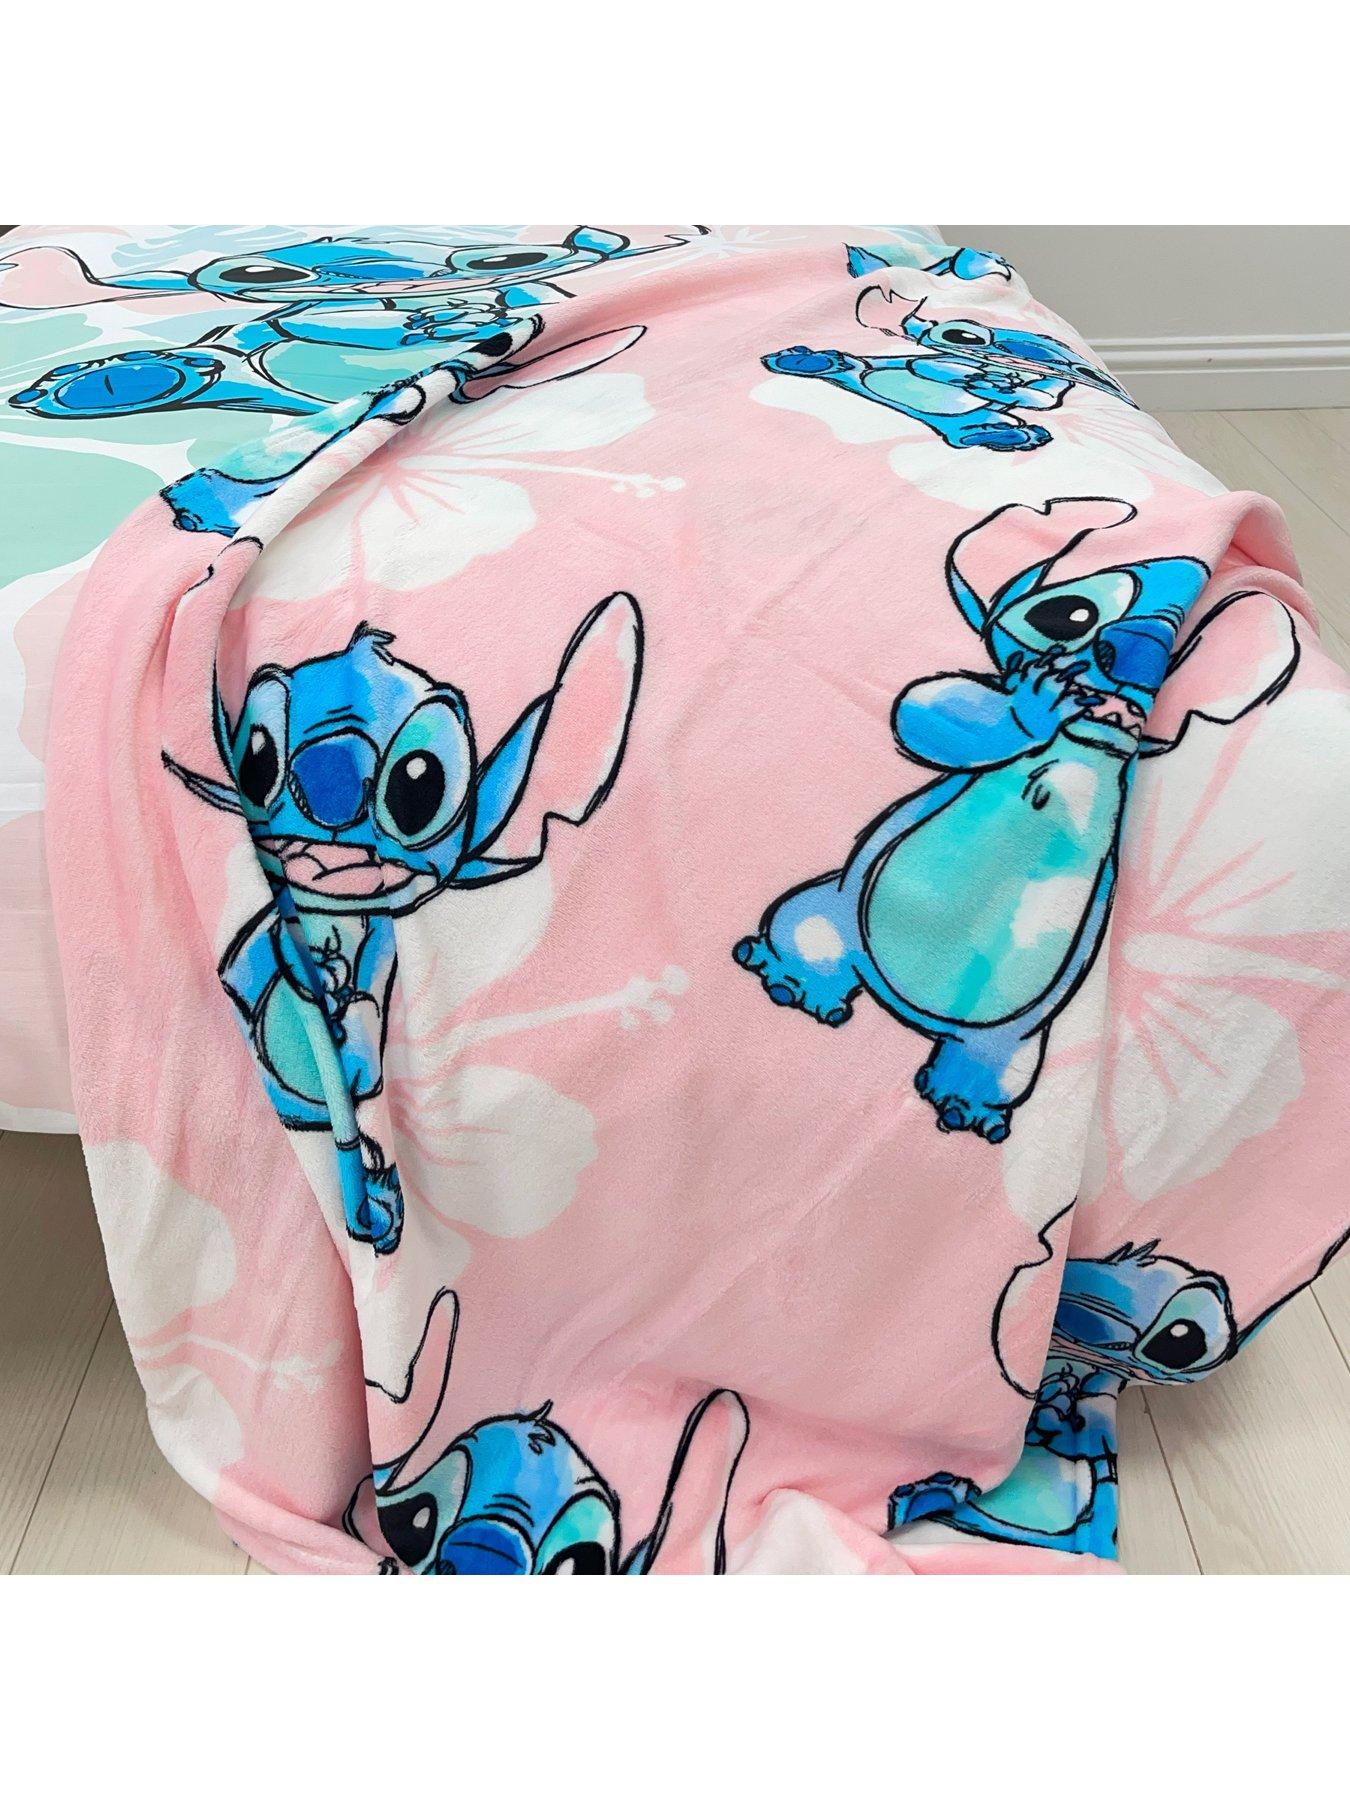 Results 121 - 180 of 182 for Lilo & Stitch Gifts